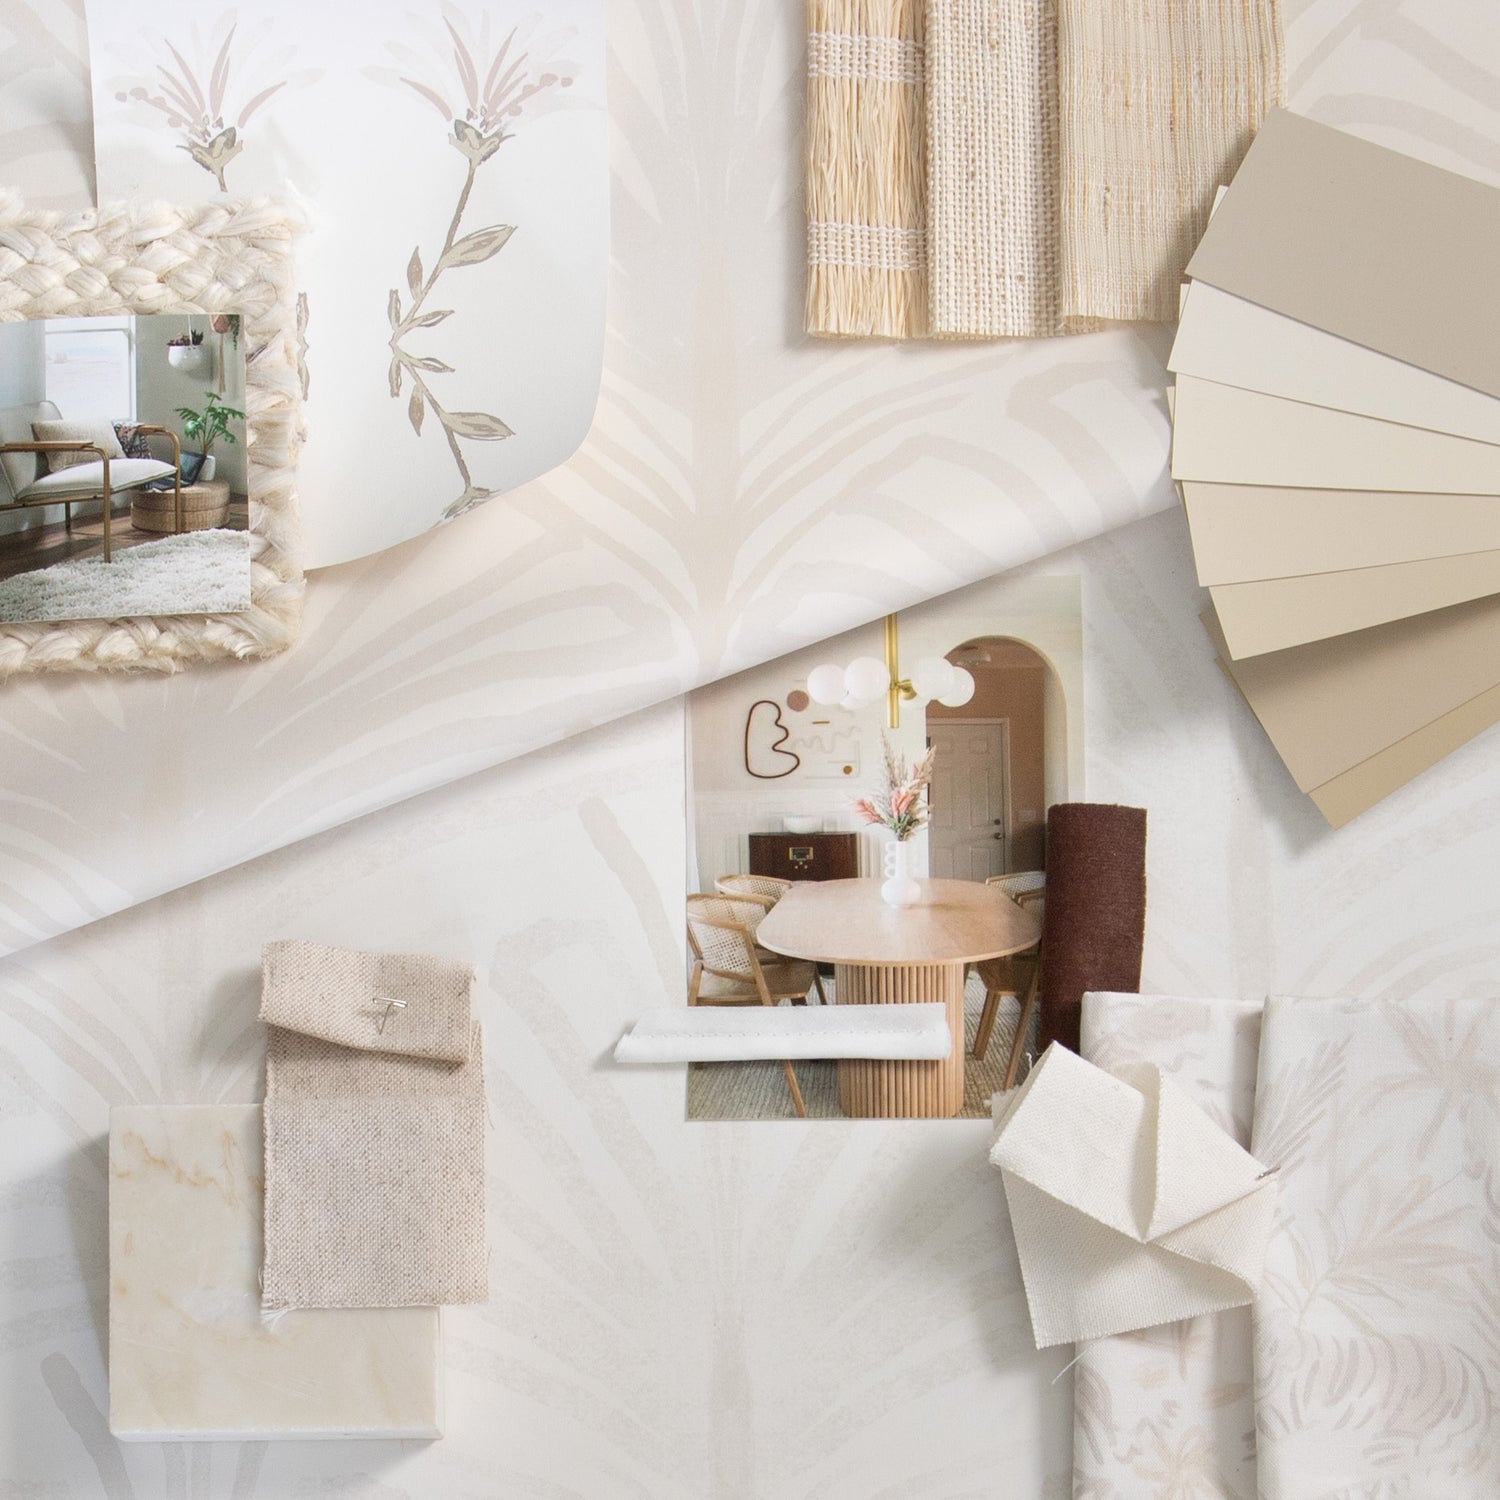 Interior design moodboard and fabric inspirations with Natural White Linen Swatch, Beige Botanical Stripe Printed Swatch, and Beige Chinoiserie Tiger Printed Swatch